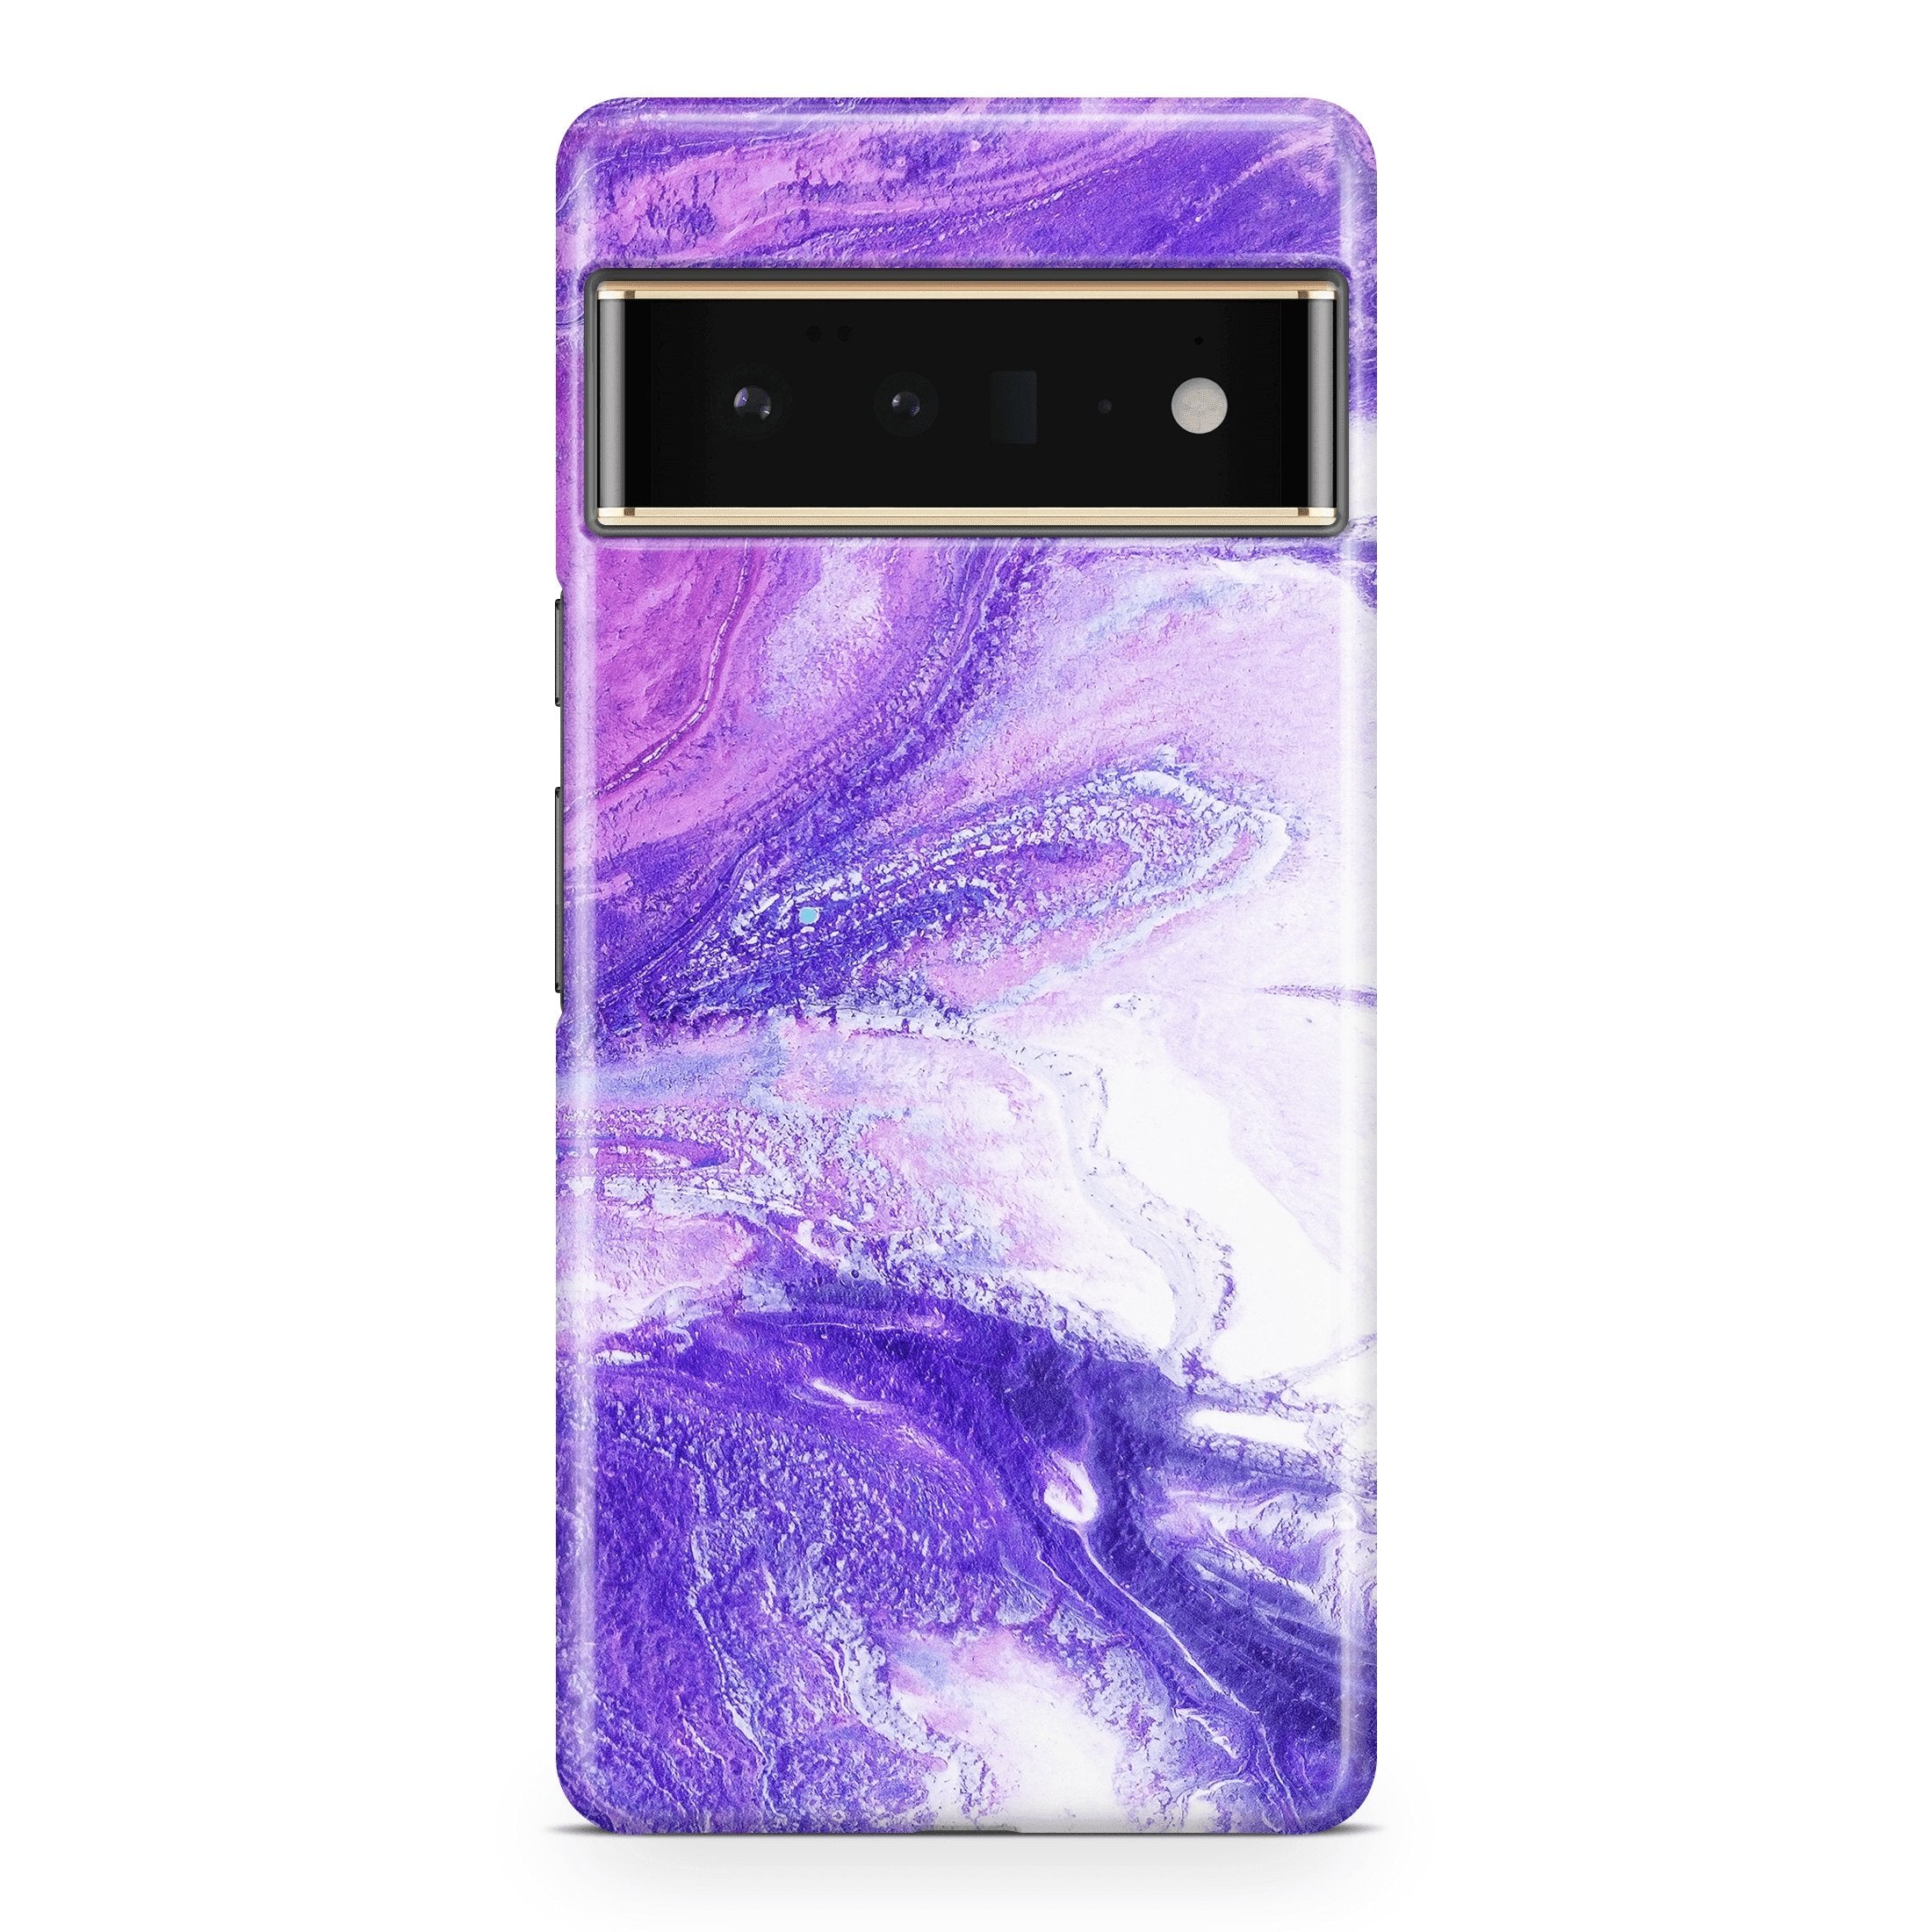 Ultra Violet Acrylic - Google phone case designs by CaseSwagger